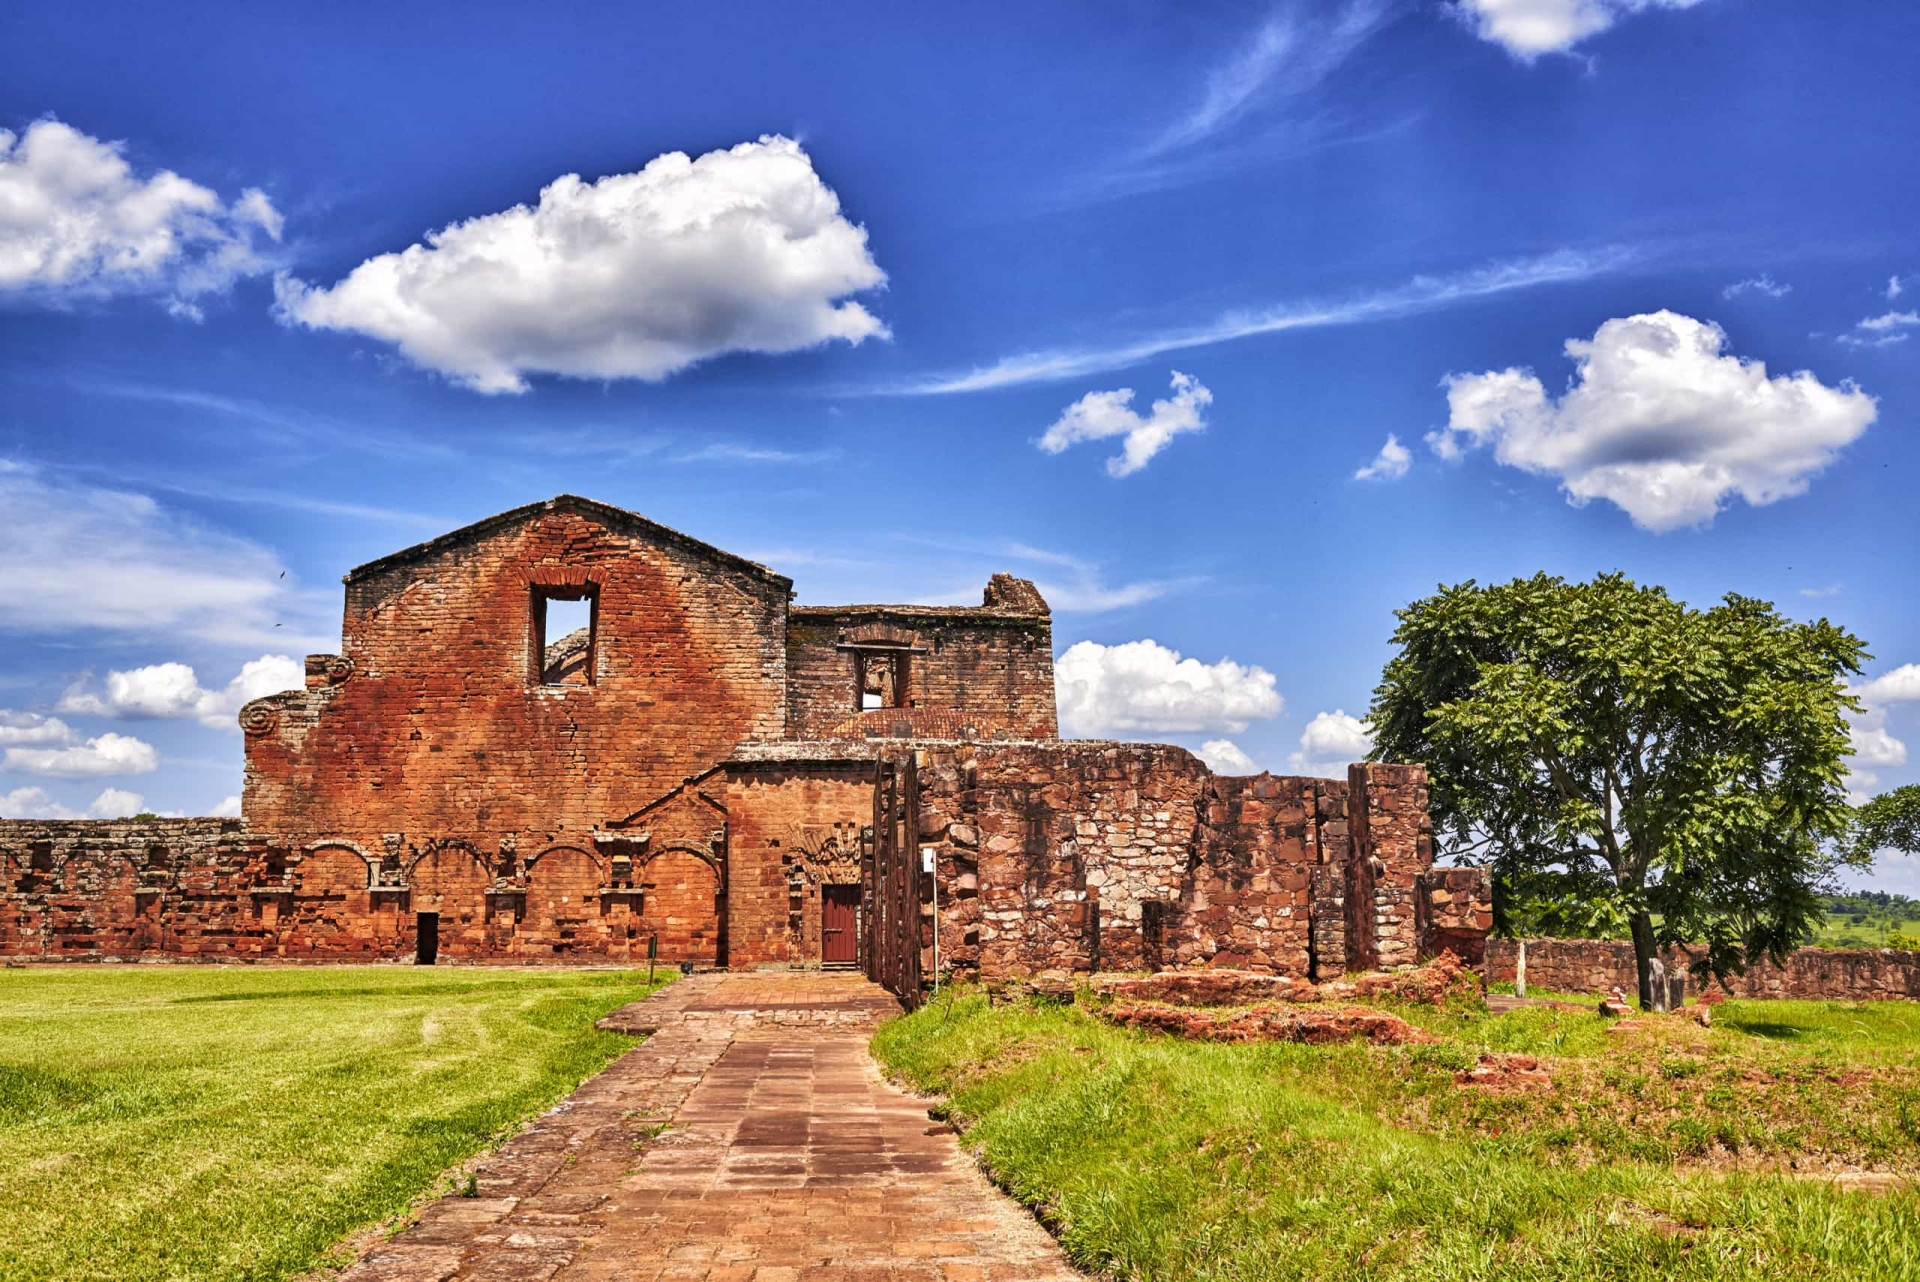 Location: Paraguay<br>Criteria: Cultural<br>Year established: 1993<br>Description: Two fine examples of the many Jesuit reductions (small colonies established by the missionaries in various locations in South America) built in the 18th and 19th centuries.